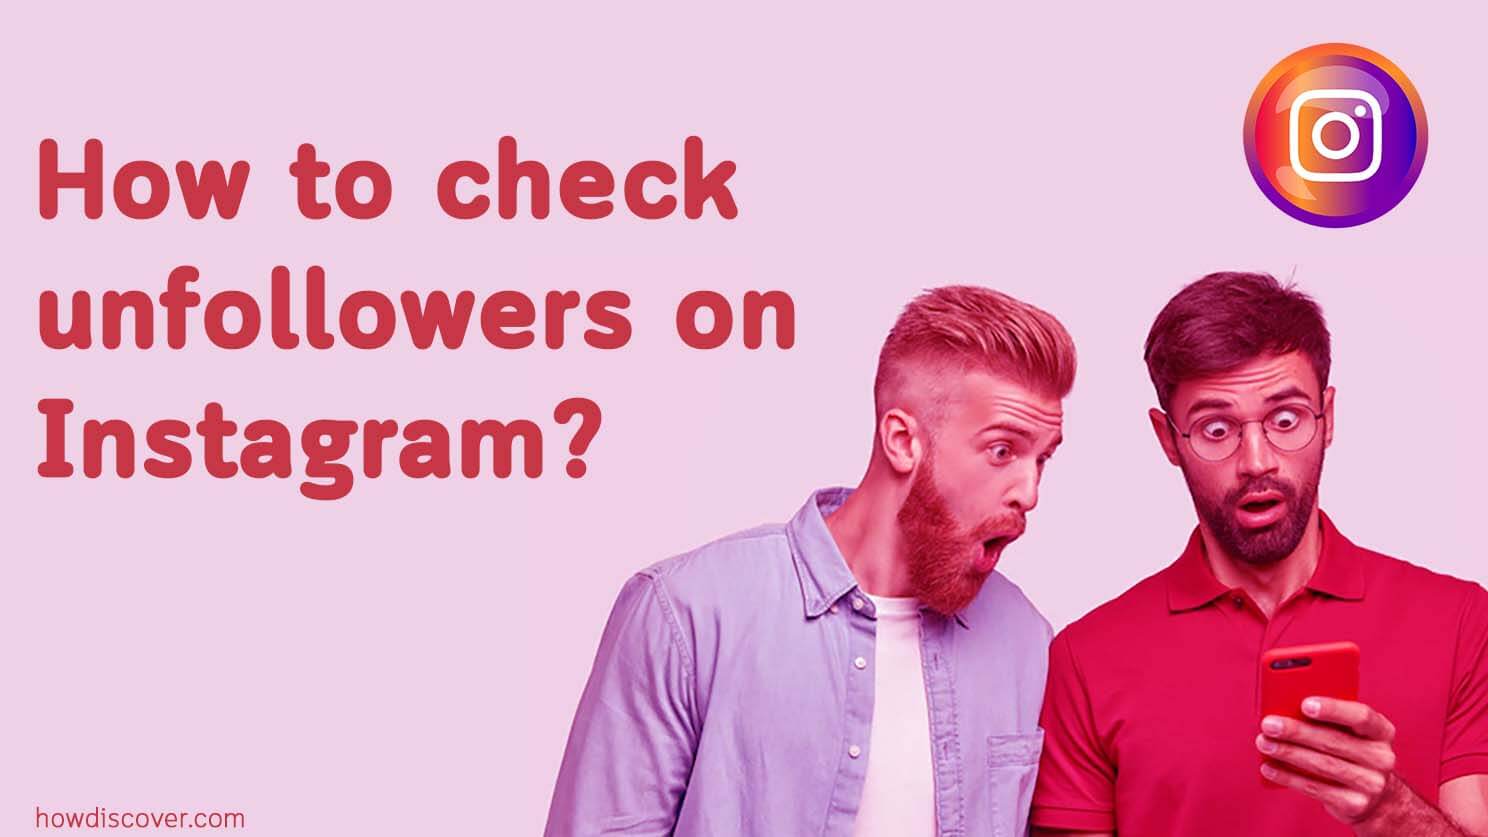 How to check unfollowers on Instagram?